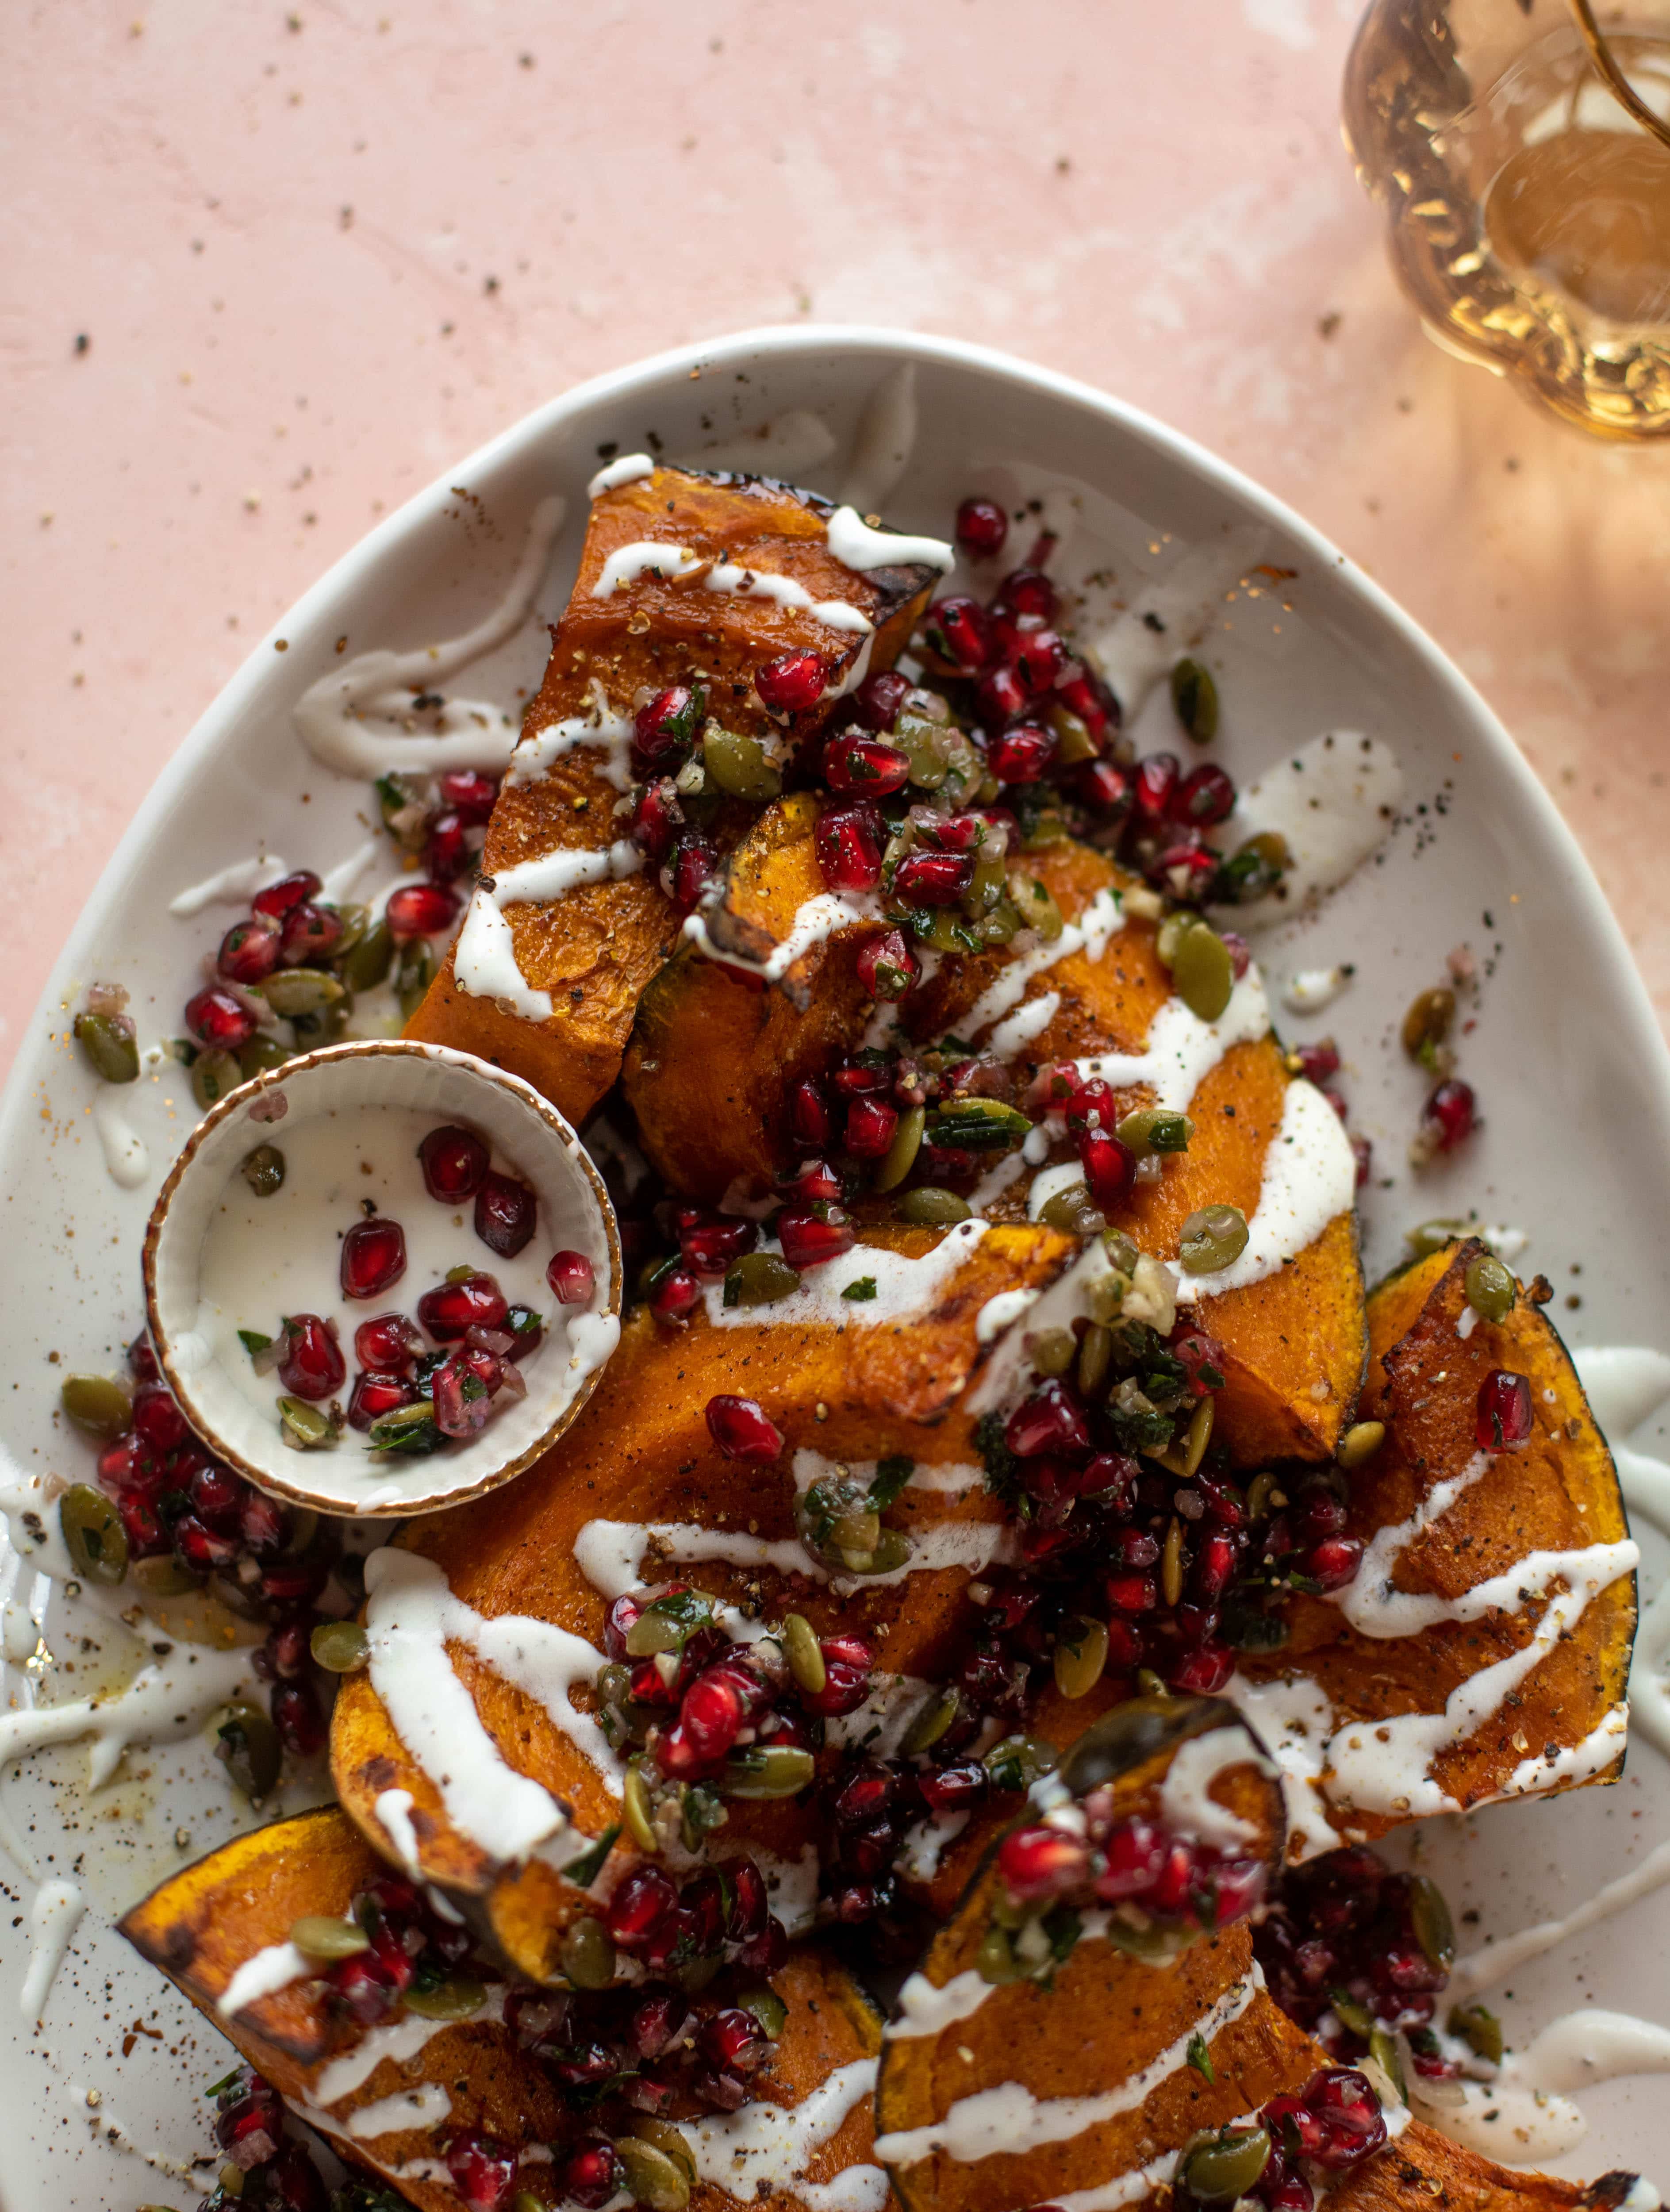 This roasted kabocha squash is caramely and naturally sweet, drizzled with whipped goat cheese and topped with pomegranate pepita relish. It's unreal!